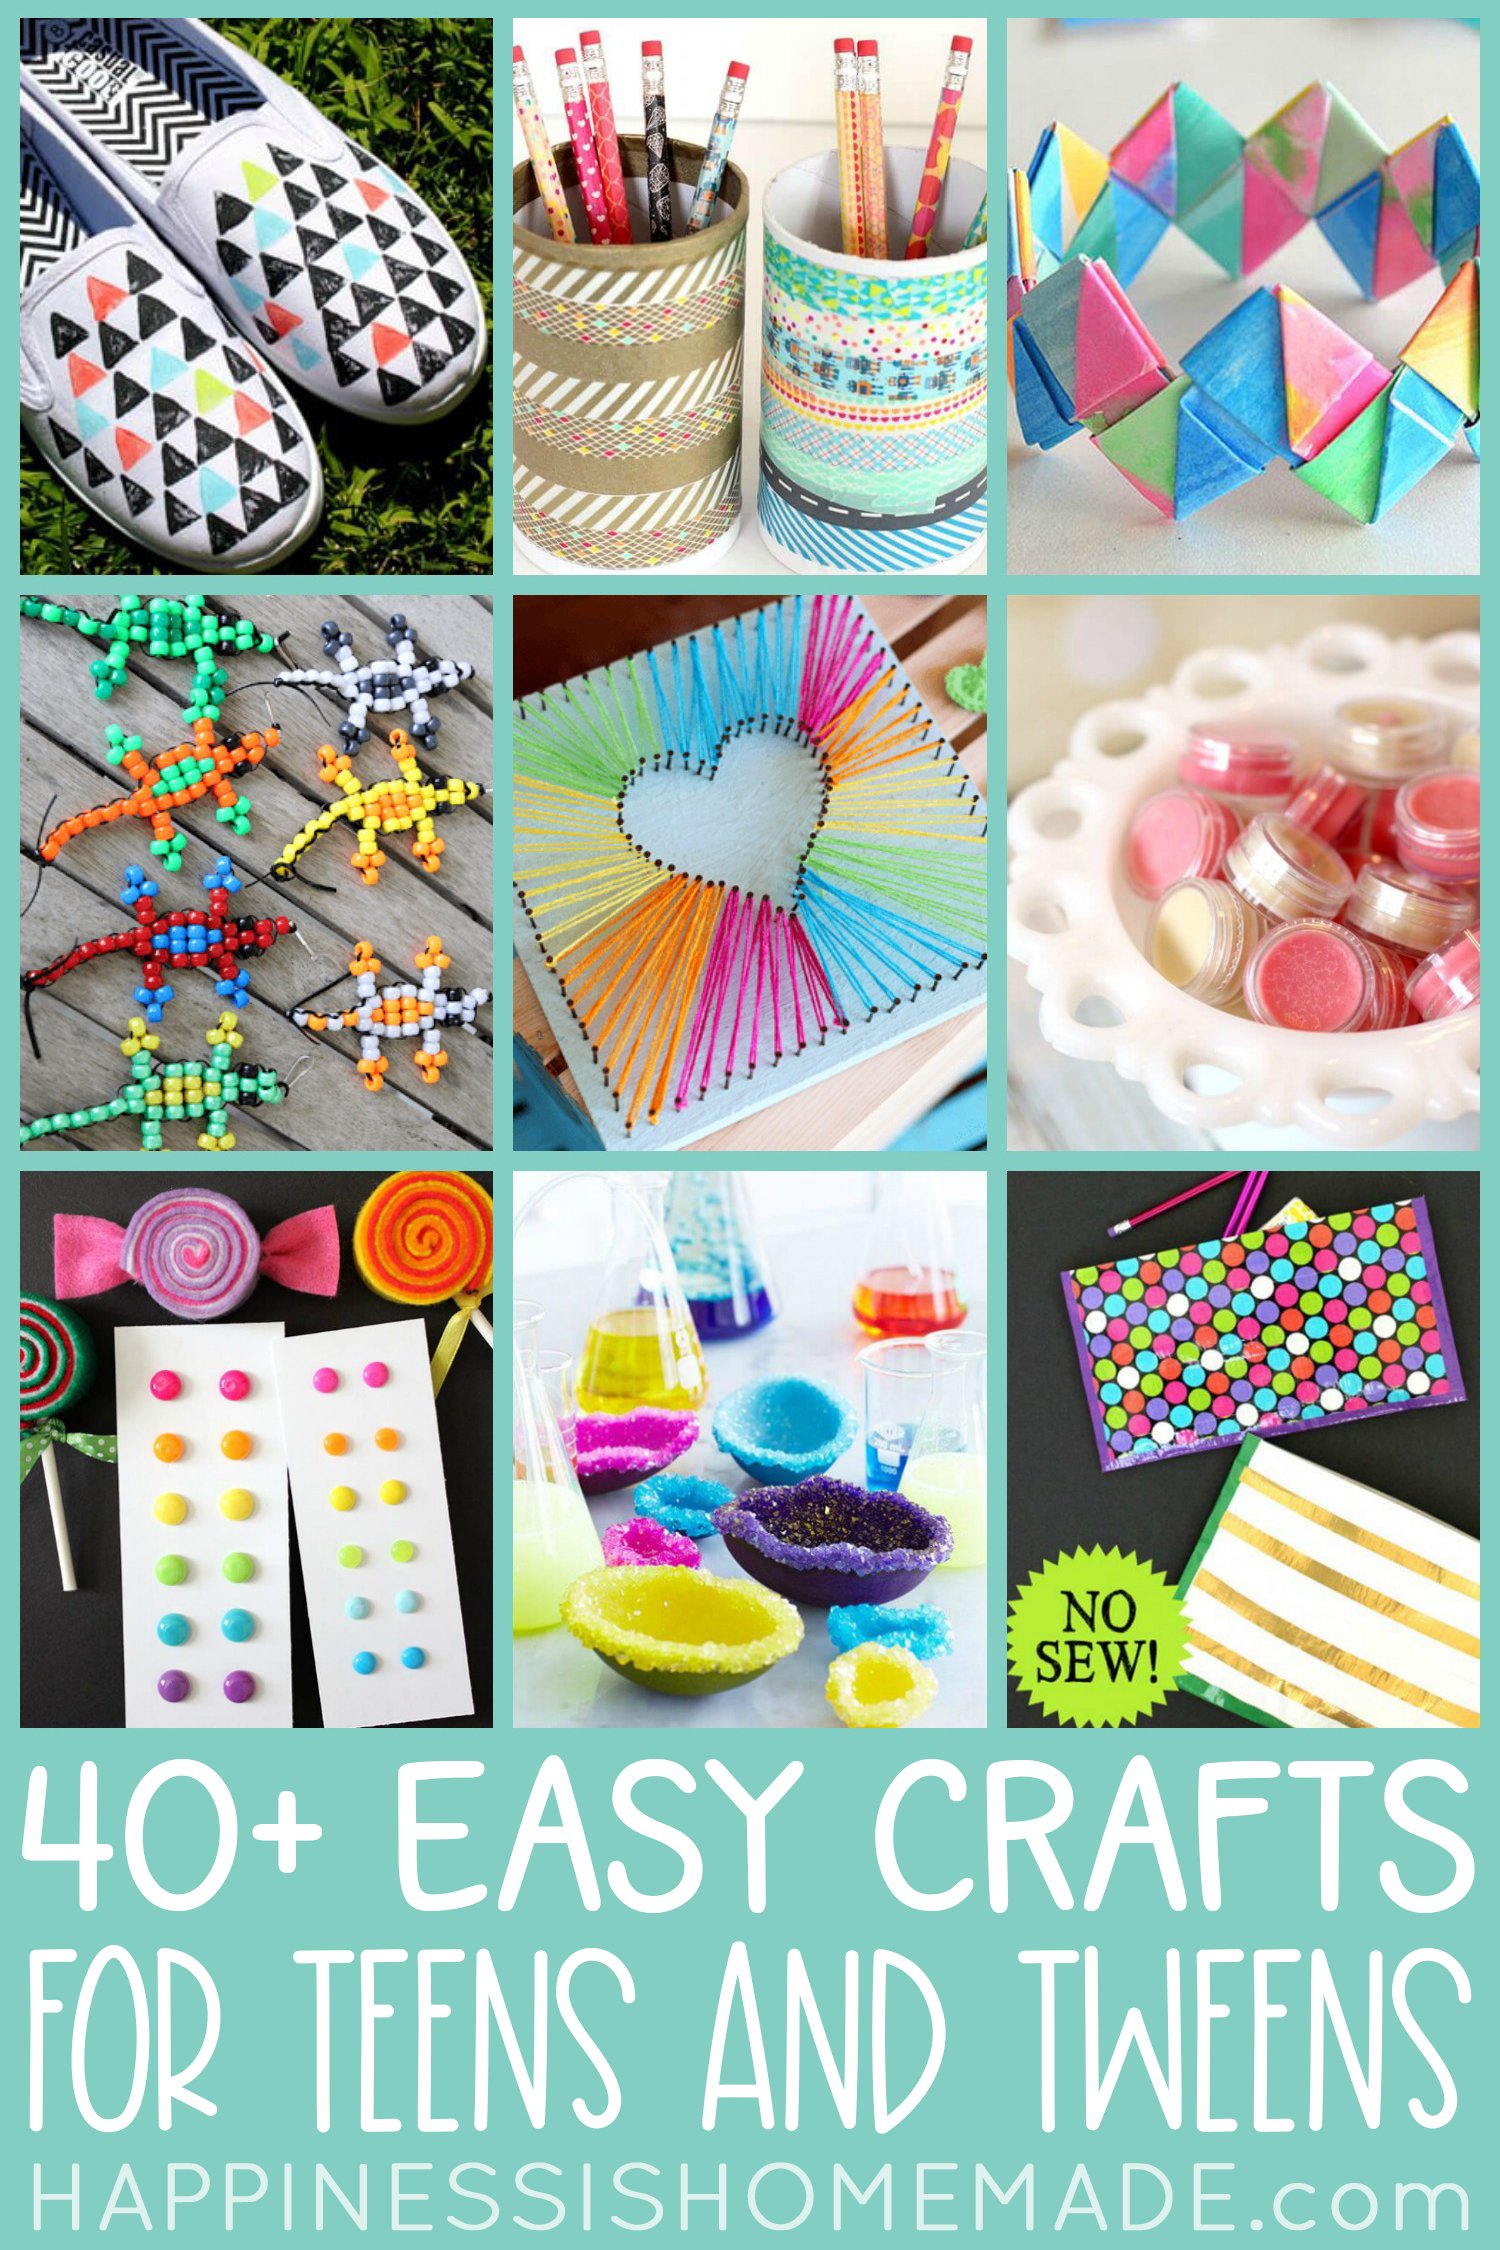 https://www.happinessishomemade.net/wp-content/uploads/2016/05/40-Easy-Crafts-for-Teens-and-Tweens-1.jpg